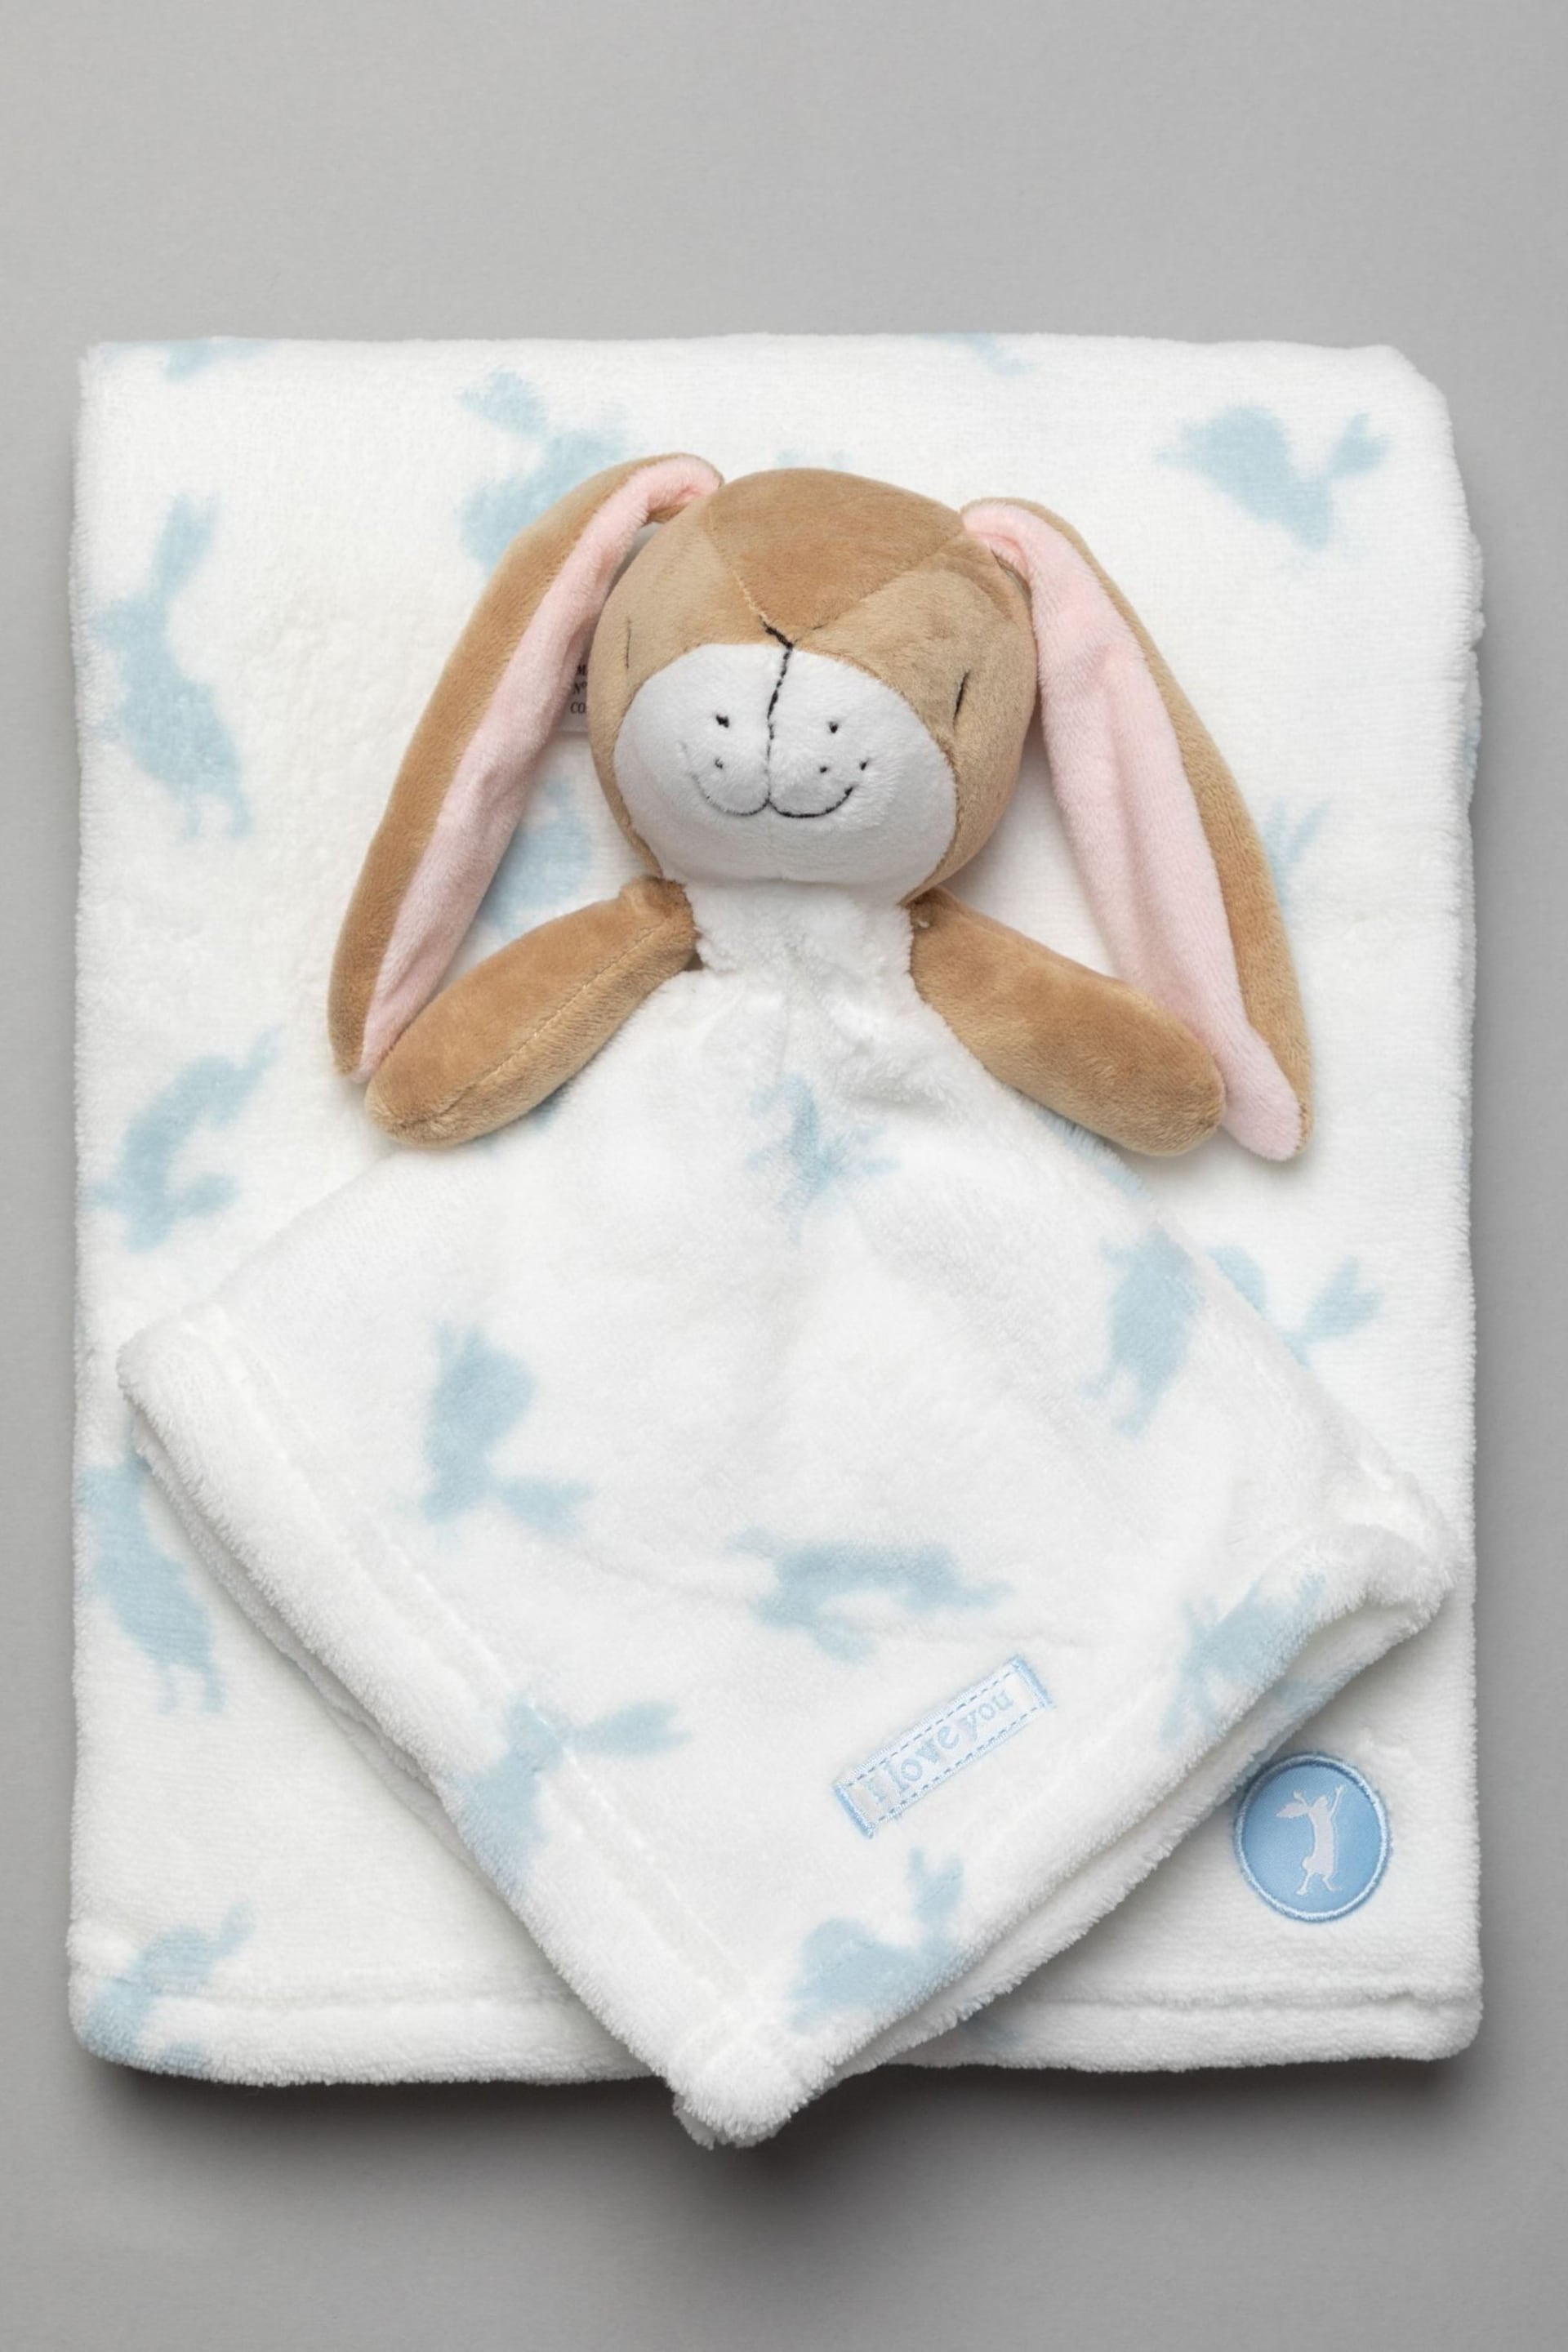 Guess How Much I Love You Blue Bunny Comforter Set - Image 1 of 3